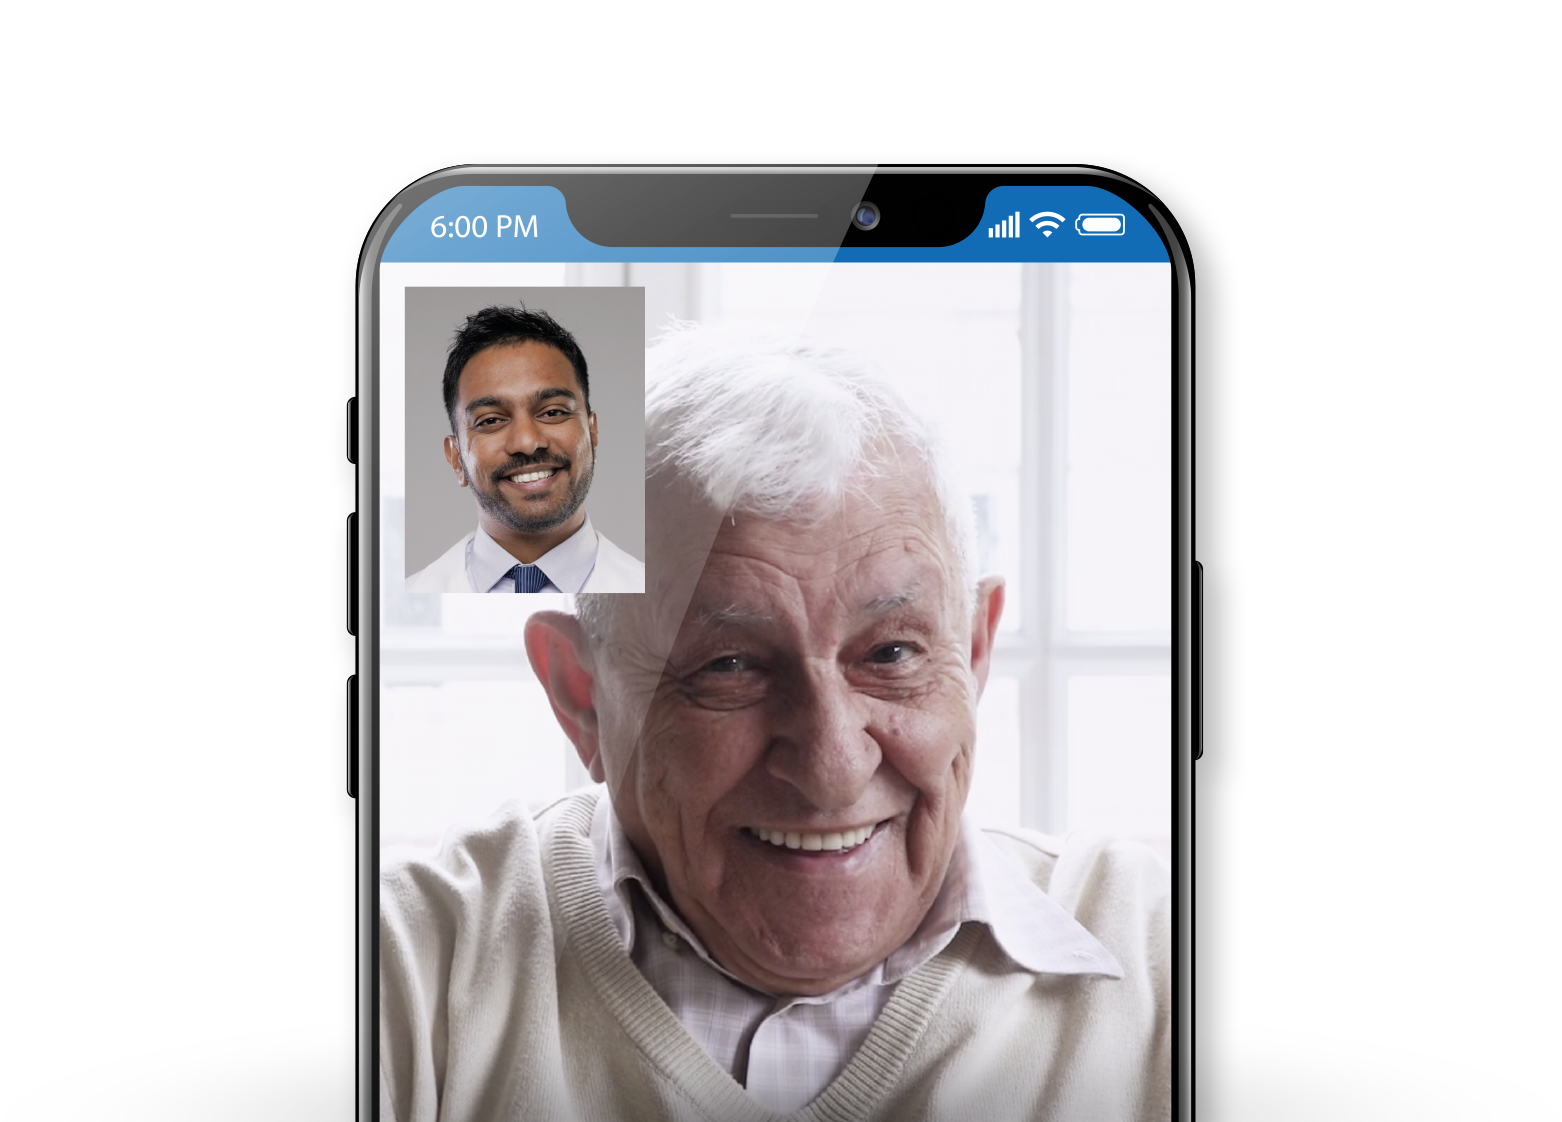 Patient and physician talking via video chat